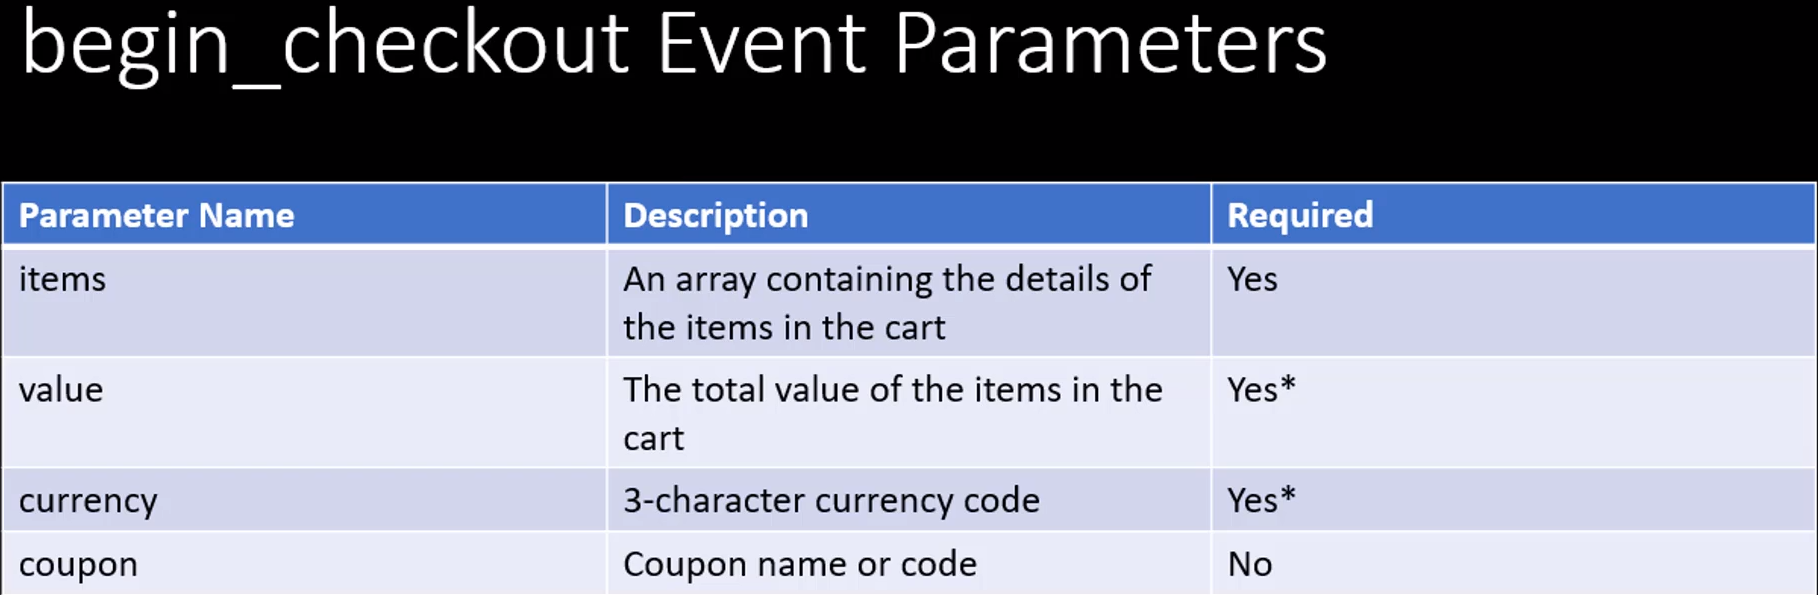 Begin_checkout-Event-Parameters